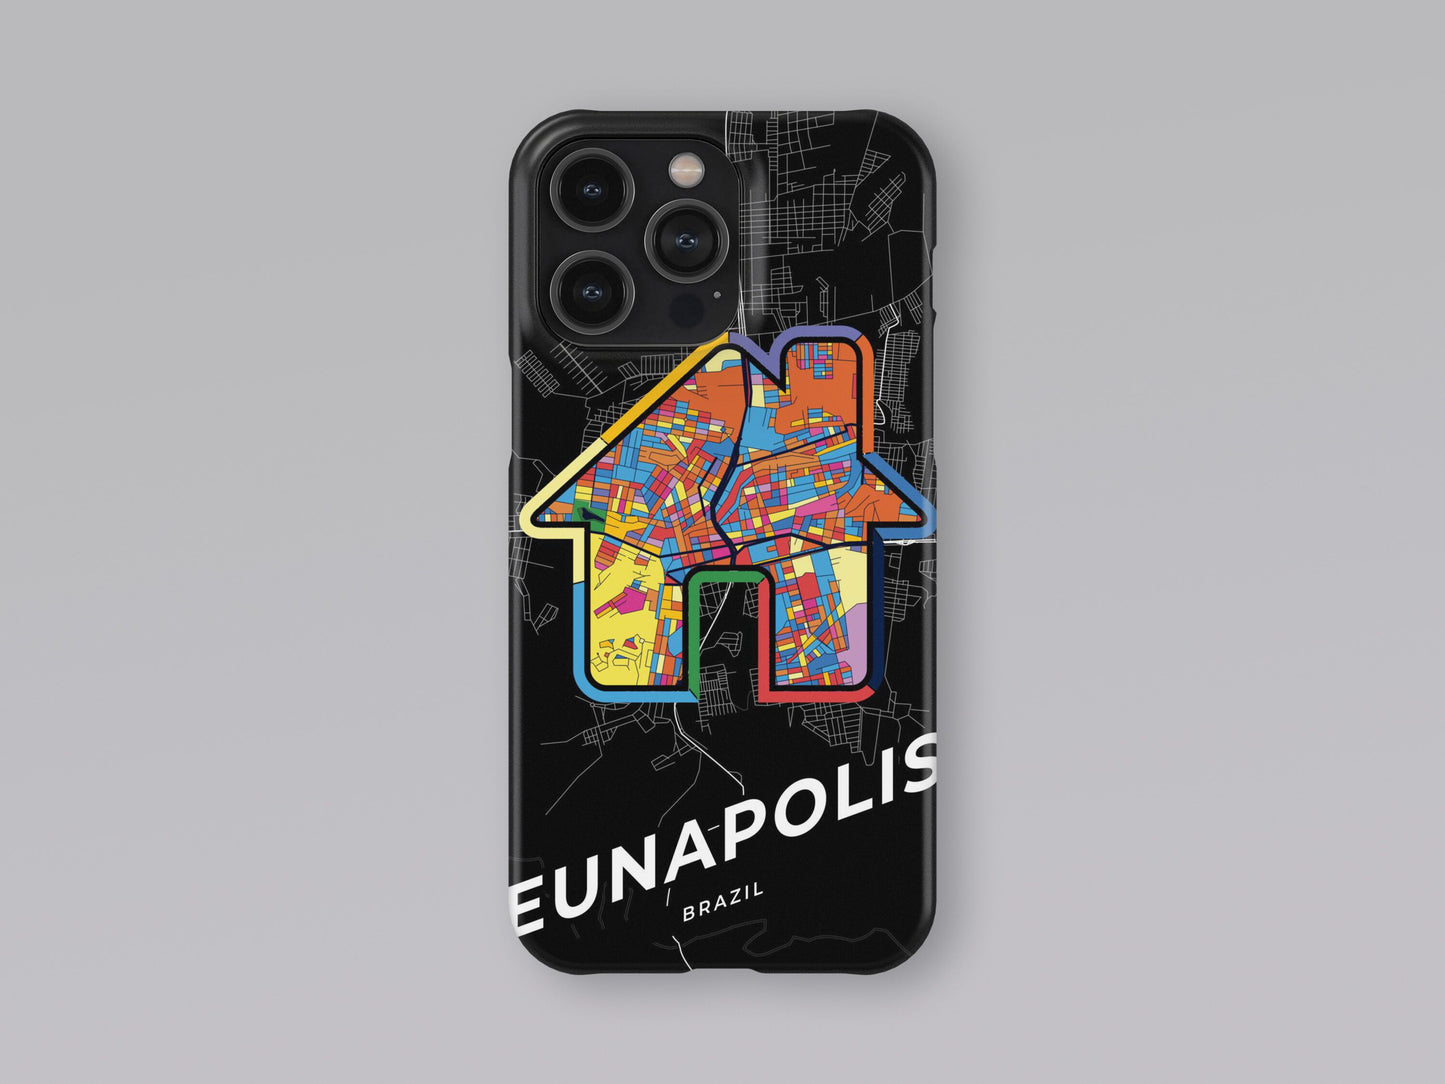 Eunapolis Brazil slim phone case with colorful icon. Birthday, wedding or housewarming gift. Couple match cases. 3